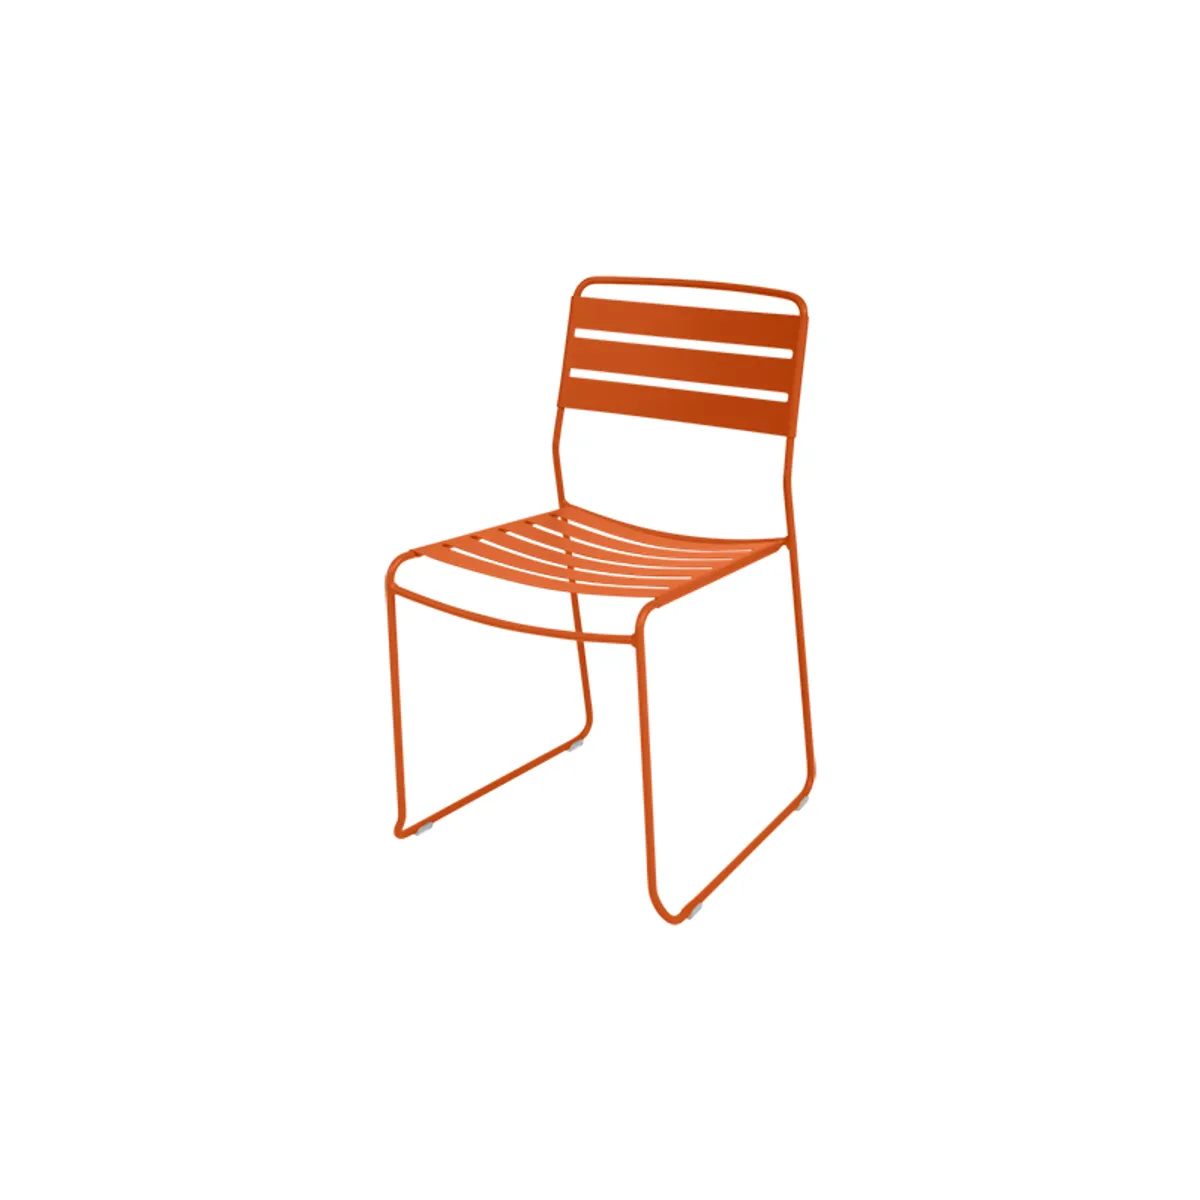 Surprising Sled Based Outdoor Chair For Cafe And Restaurants Orange